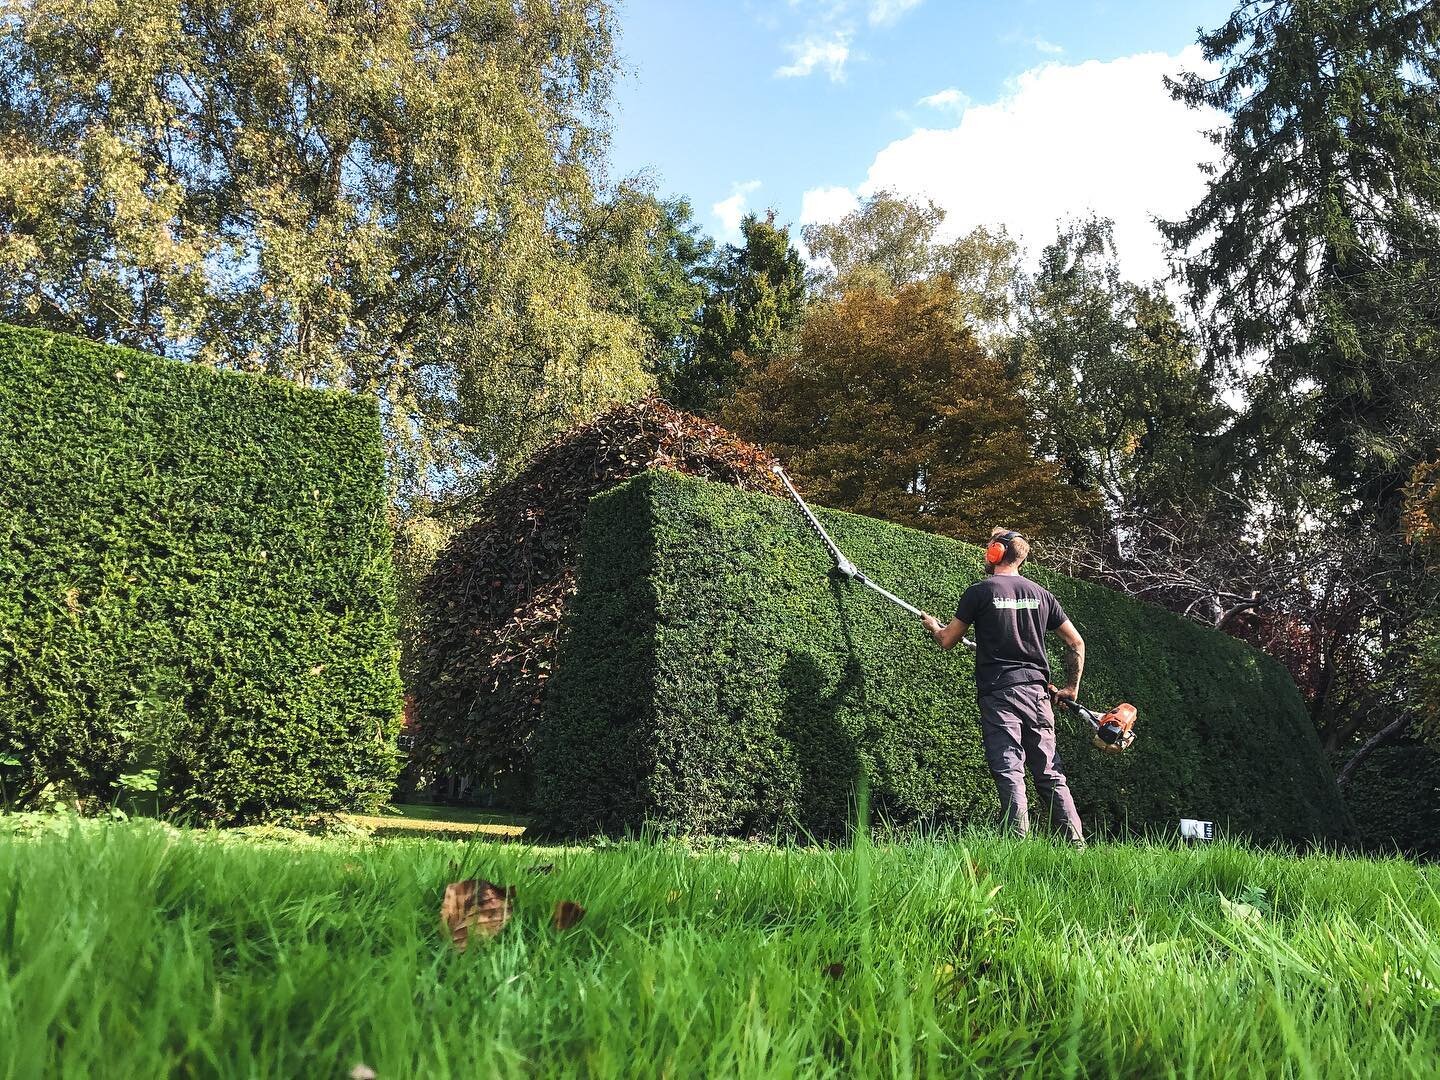 Trimming Yew hedges in Jordans last month. Using my new stihl extended blade kombi attatchment.